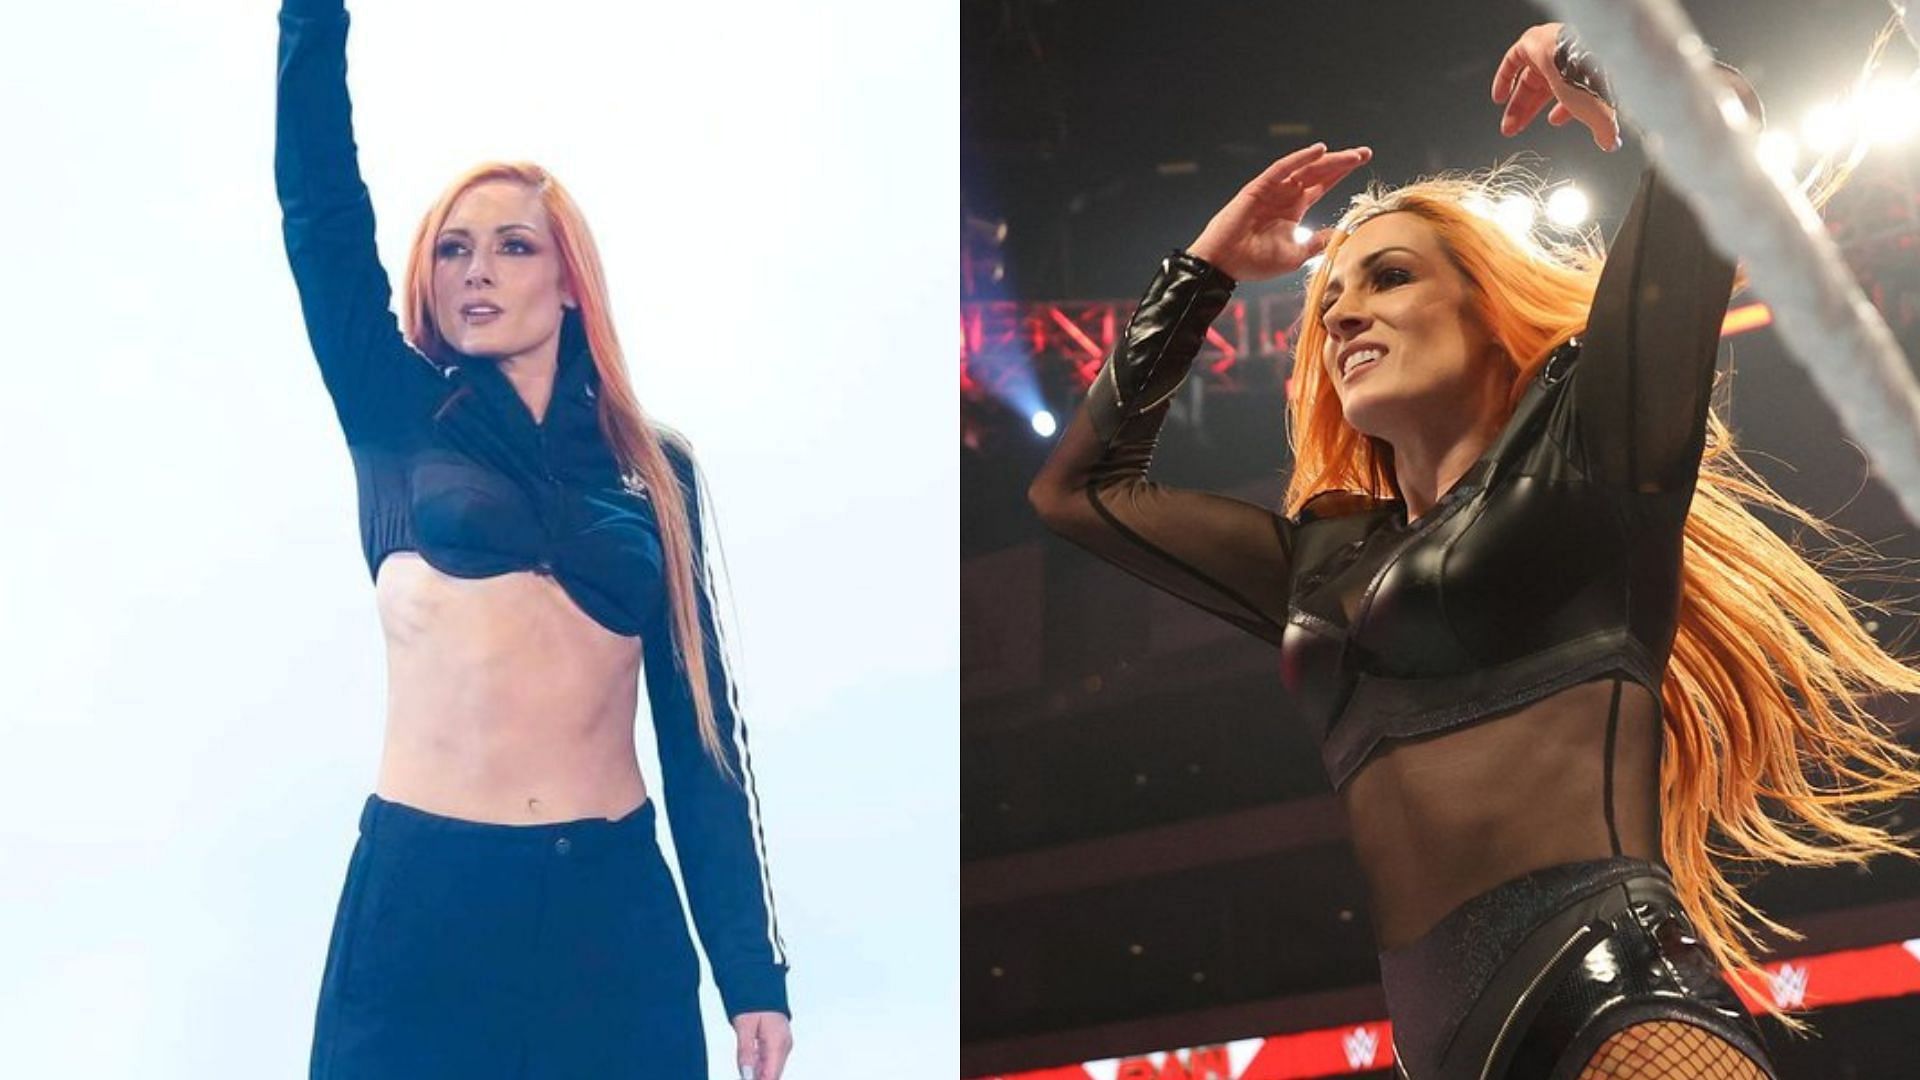 Becky Lynch recently competed in the Women